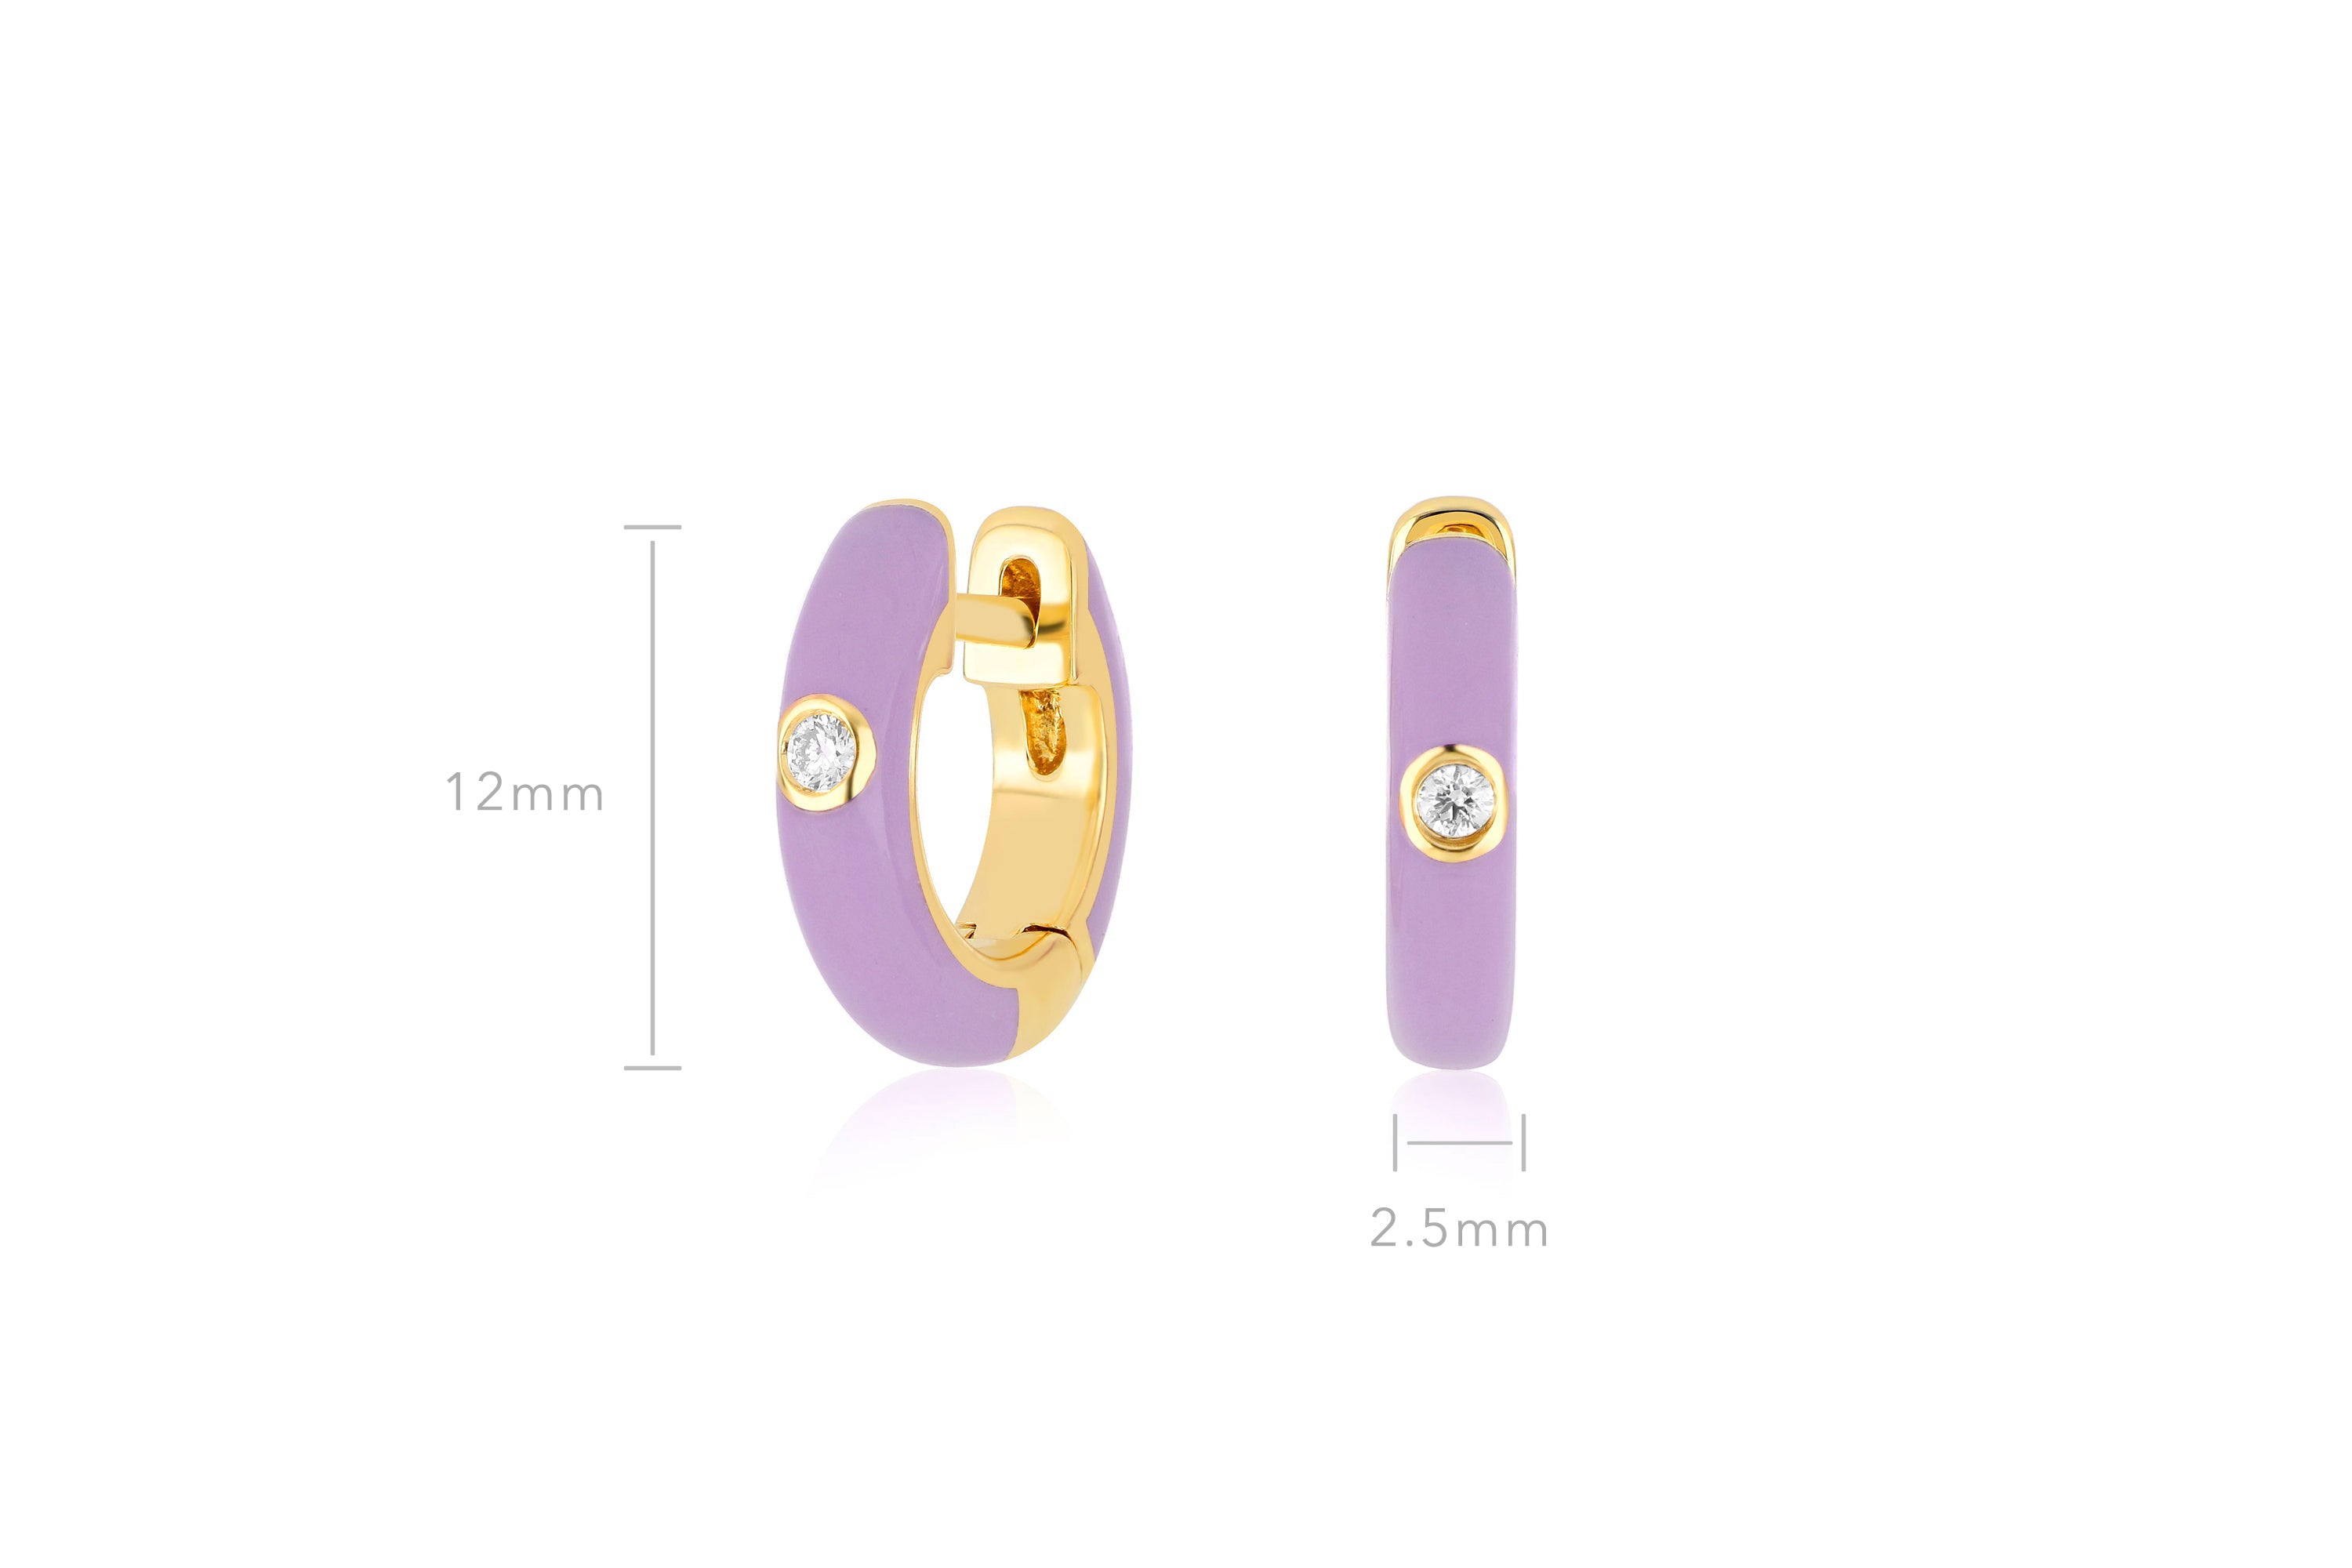 Diamond Lavender Enamel Huggie Earring in 14k yellow gold with size measurement of 12mm height and 2.5mm diameter